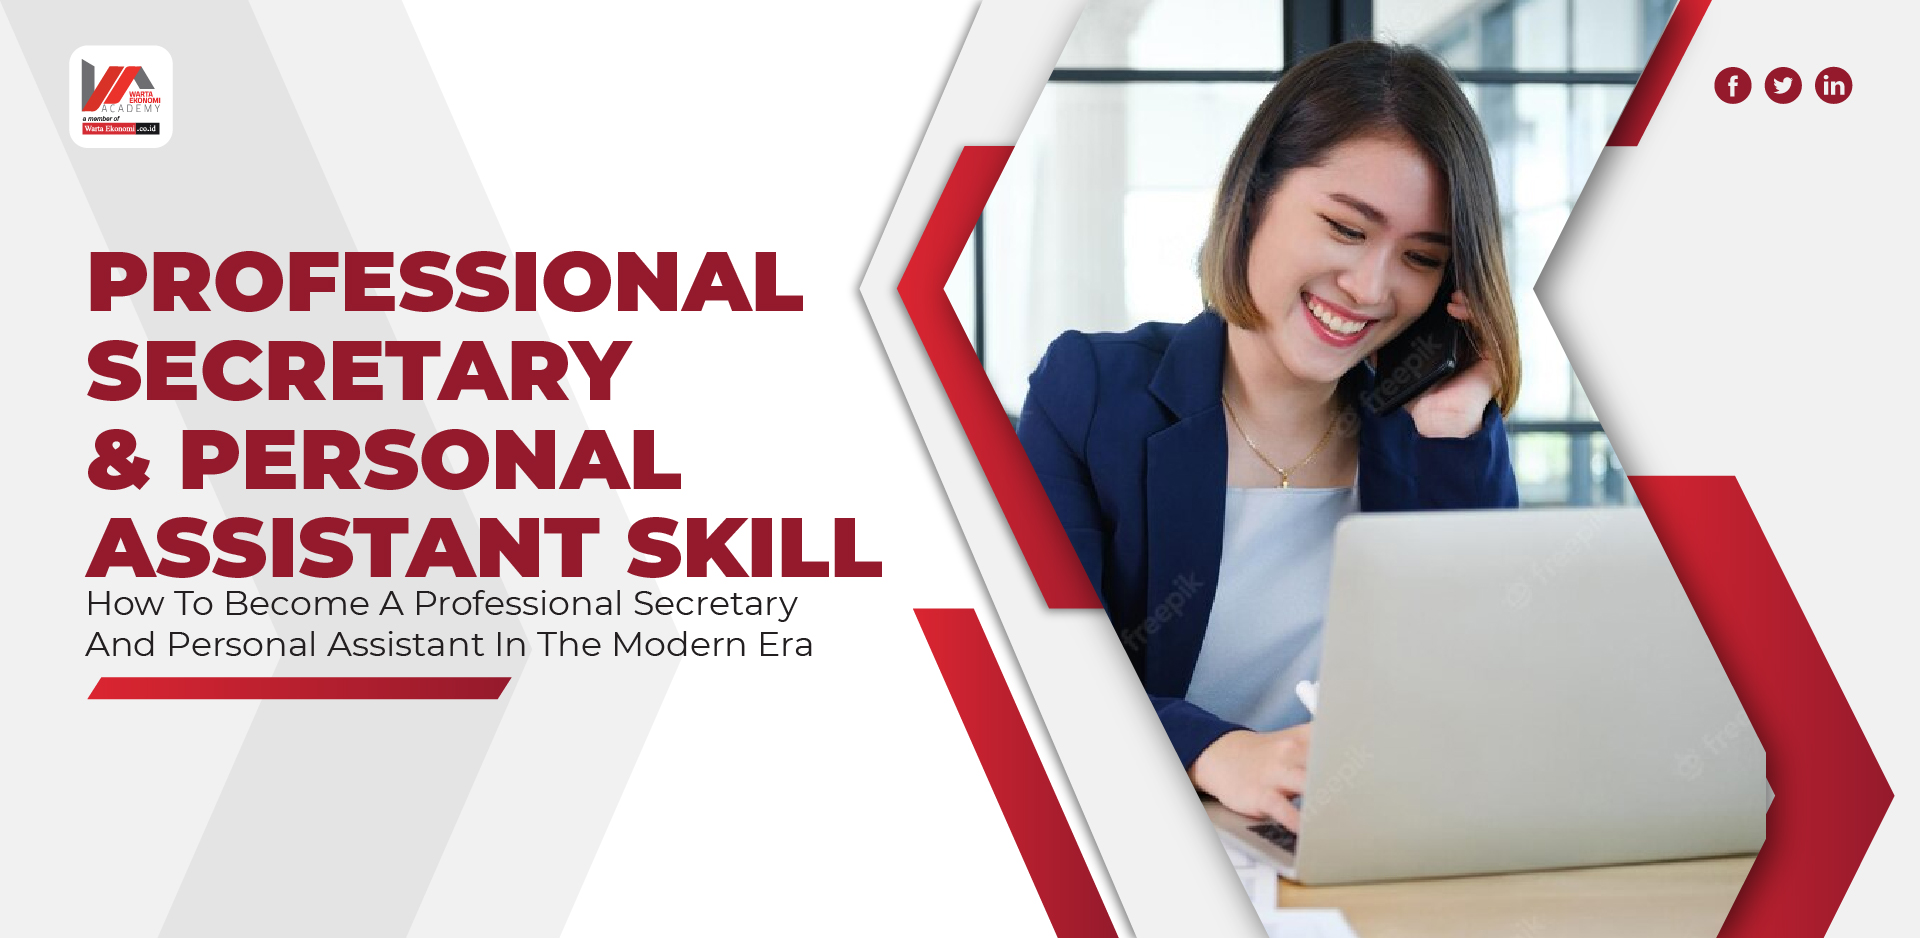 PROFESSIONAL SECRETARY & PERSONAL ASSISTANT SKILL : How To Become A Professional Secretary And Personal Assistant In The Modern Era